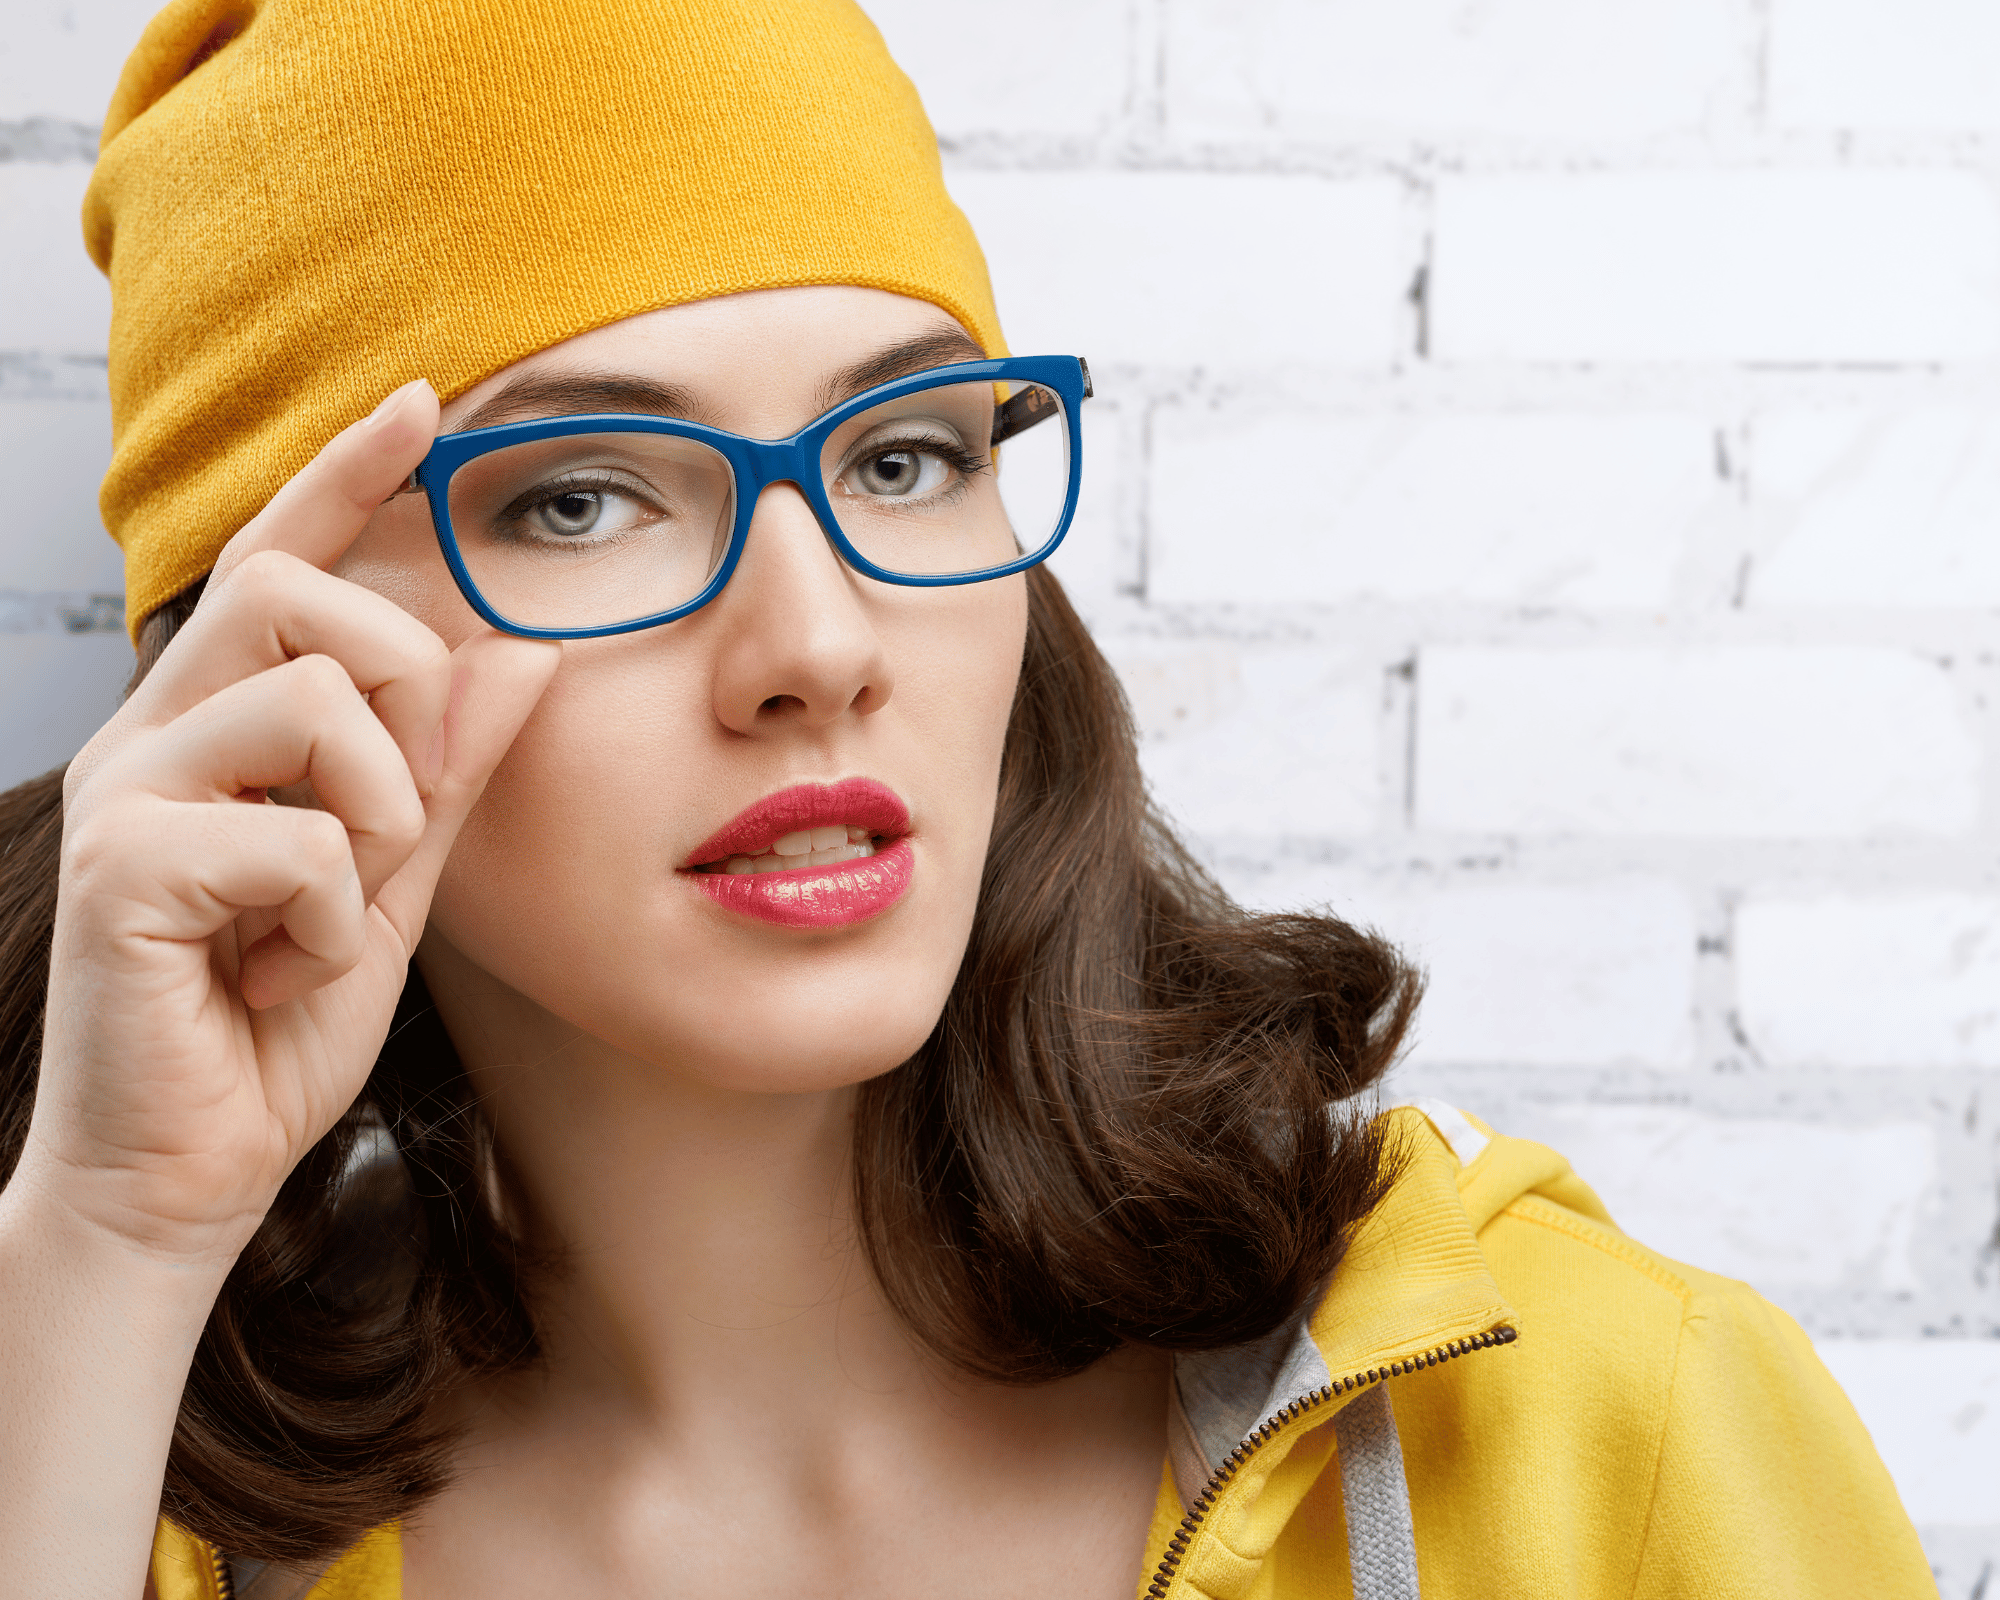 How to Pick Trendy Eyeglasses to Fit Your Outfit: A Guide to Finding the Perfect Pair